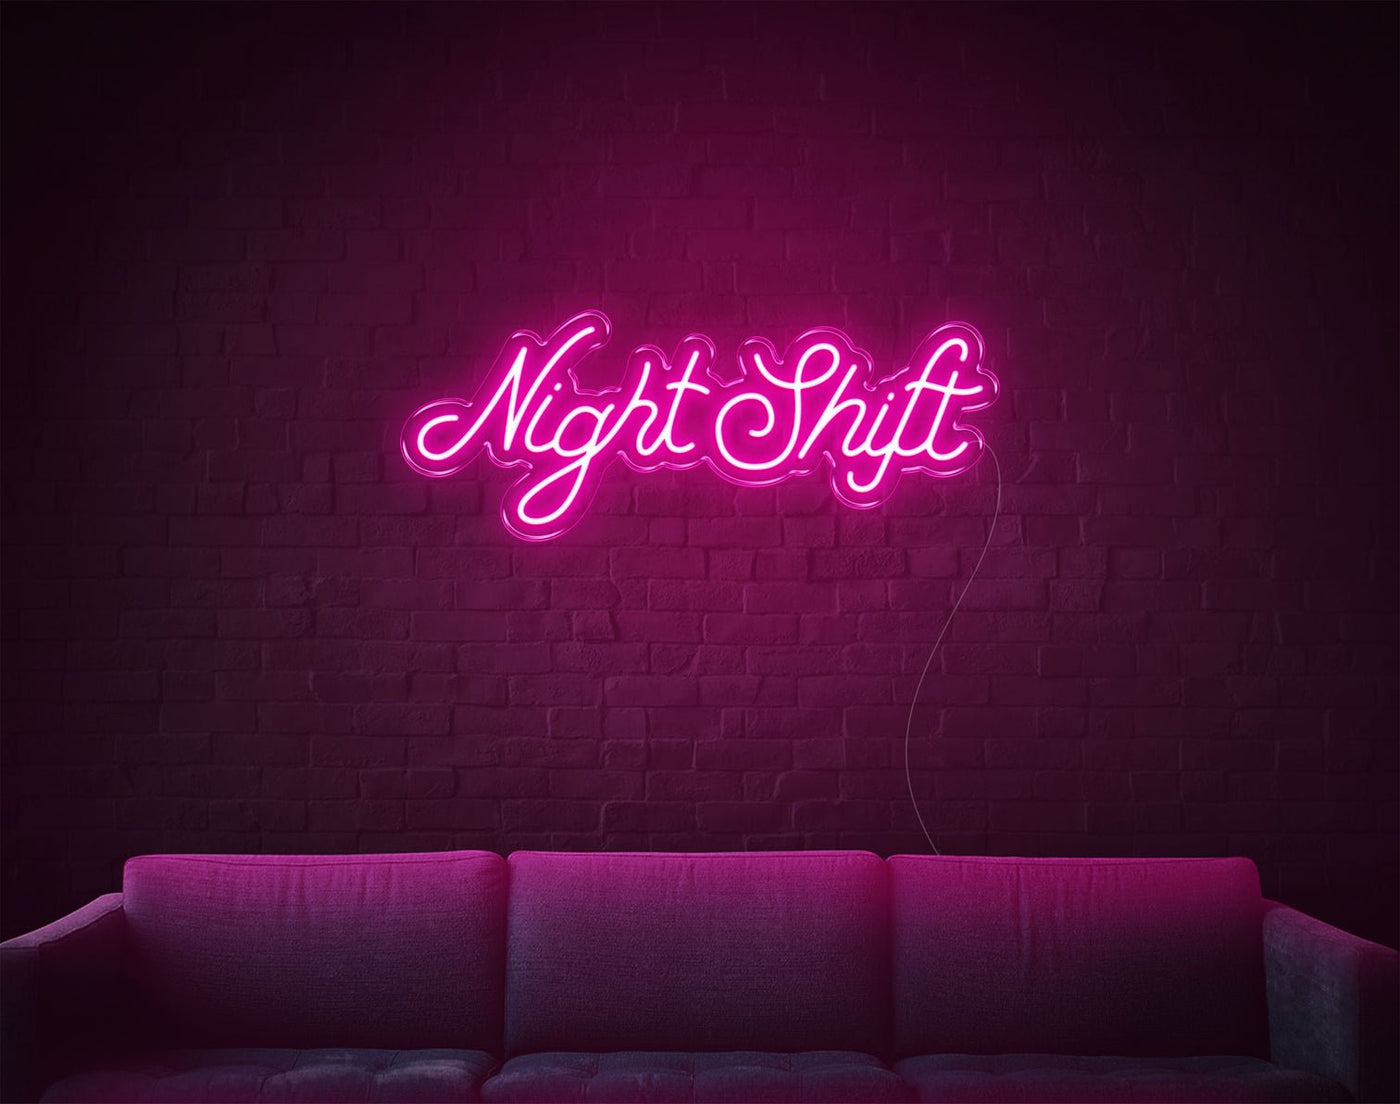 Nightshift LED Neon Sign - 11inch x 30inchLight Pink